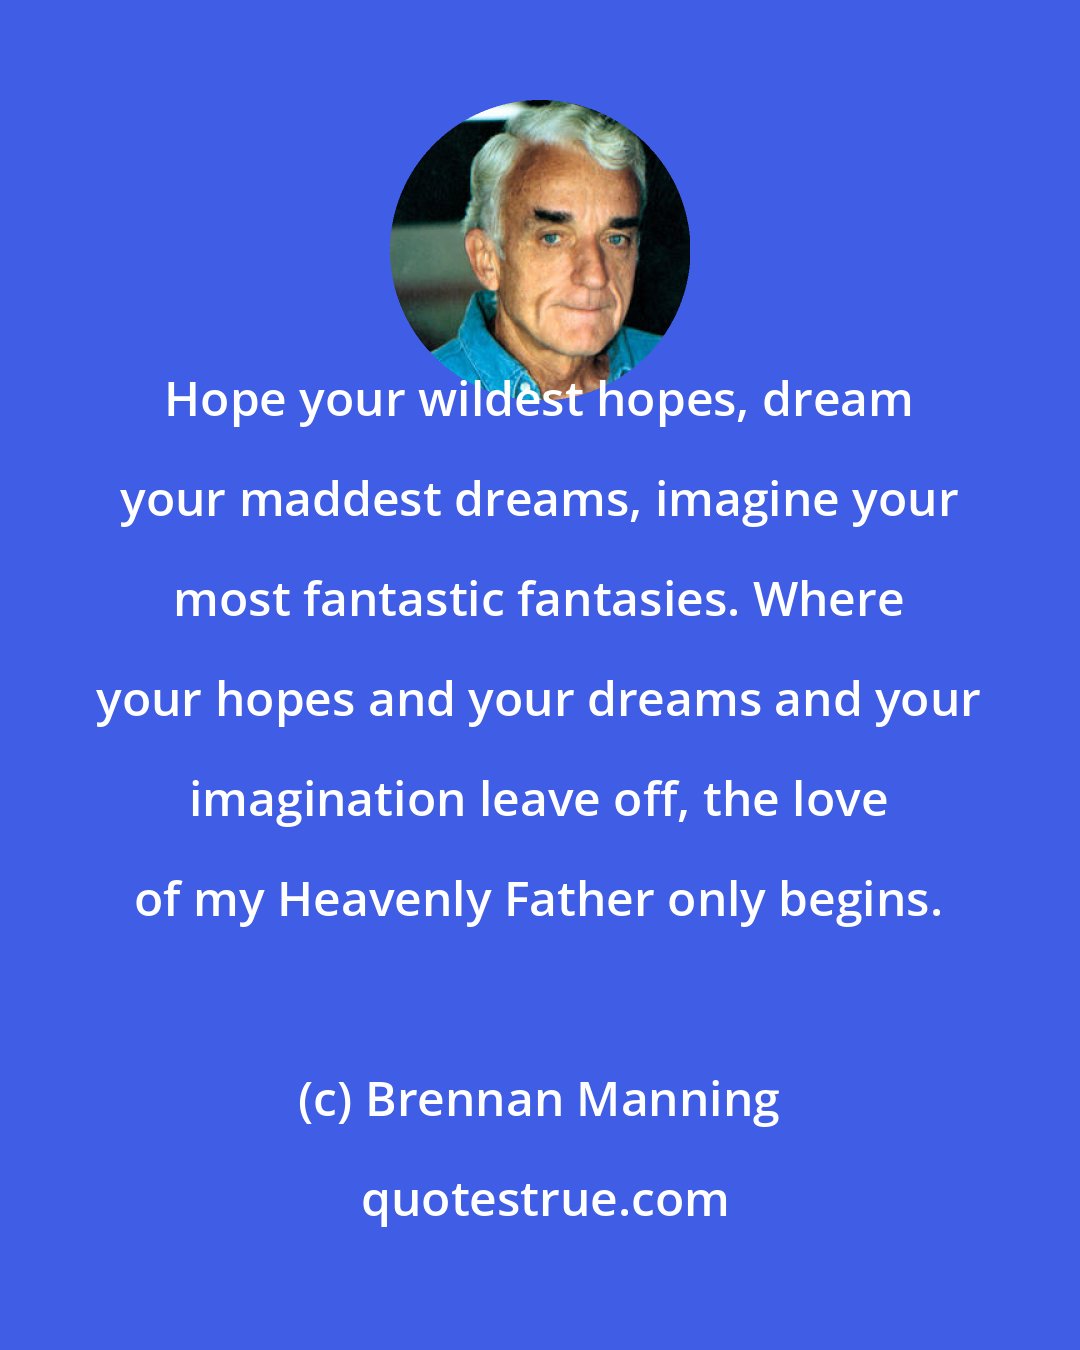 Brennan Manning: Hope your wildest hopes, dream your maddest dreams, imagine your most fantastic fantasies. Where your hopes and your dreams and your imagination leave off, the love of my Heavenly Father only begins.